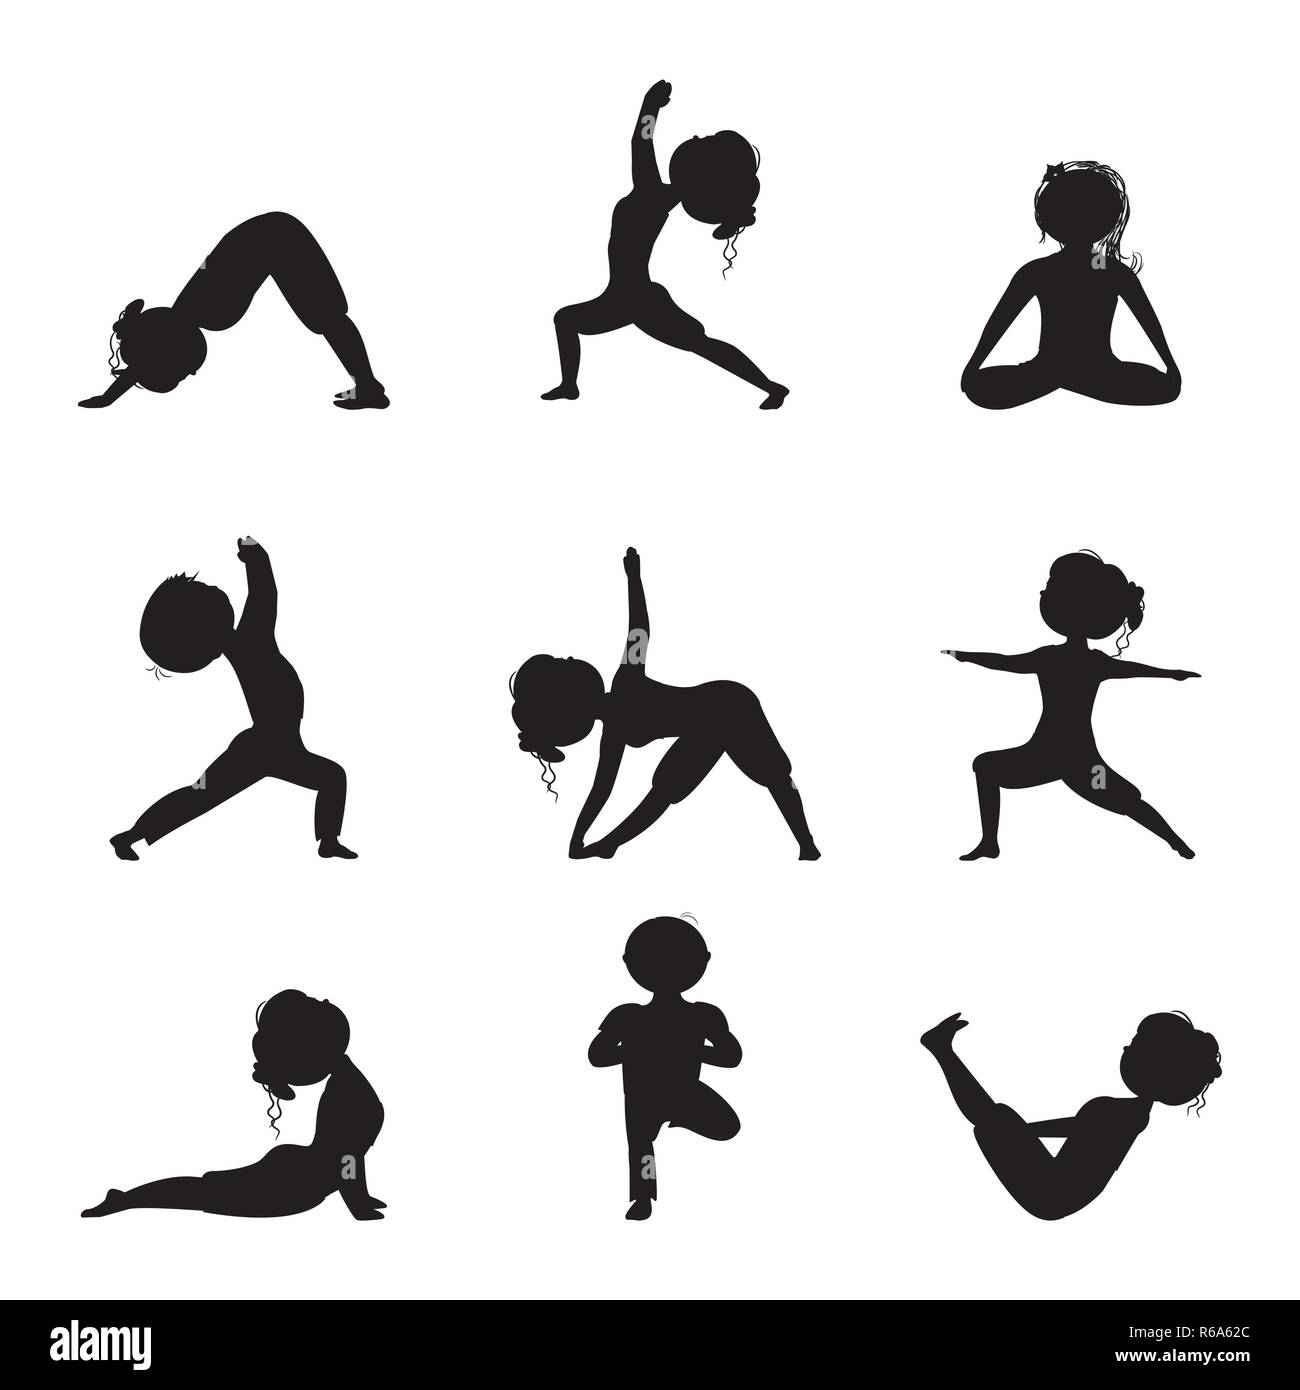 2,607 10 Yoga Poses Images, Stock Photos, 3D objects, & Vectors